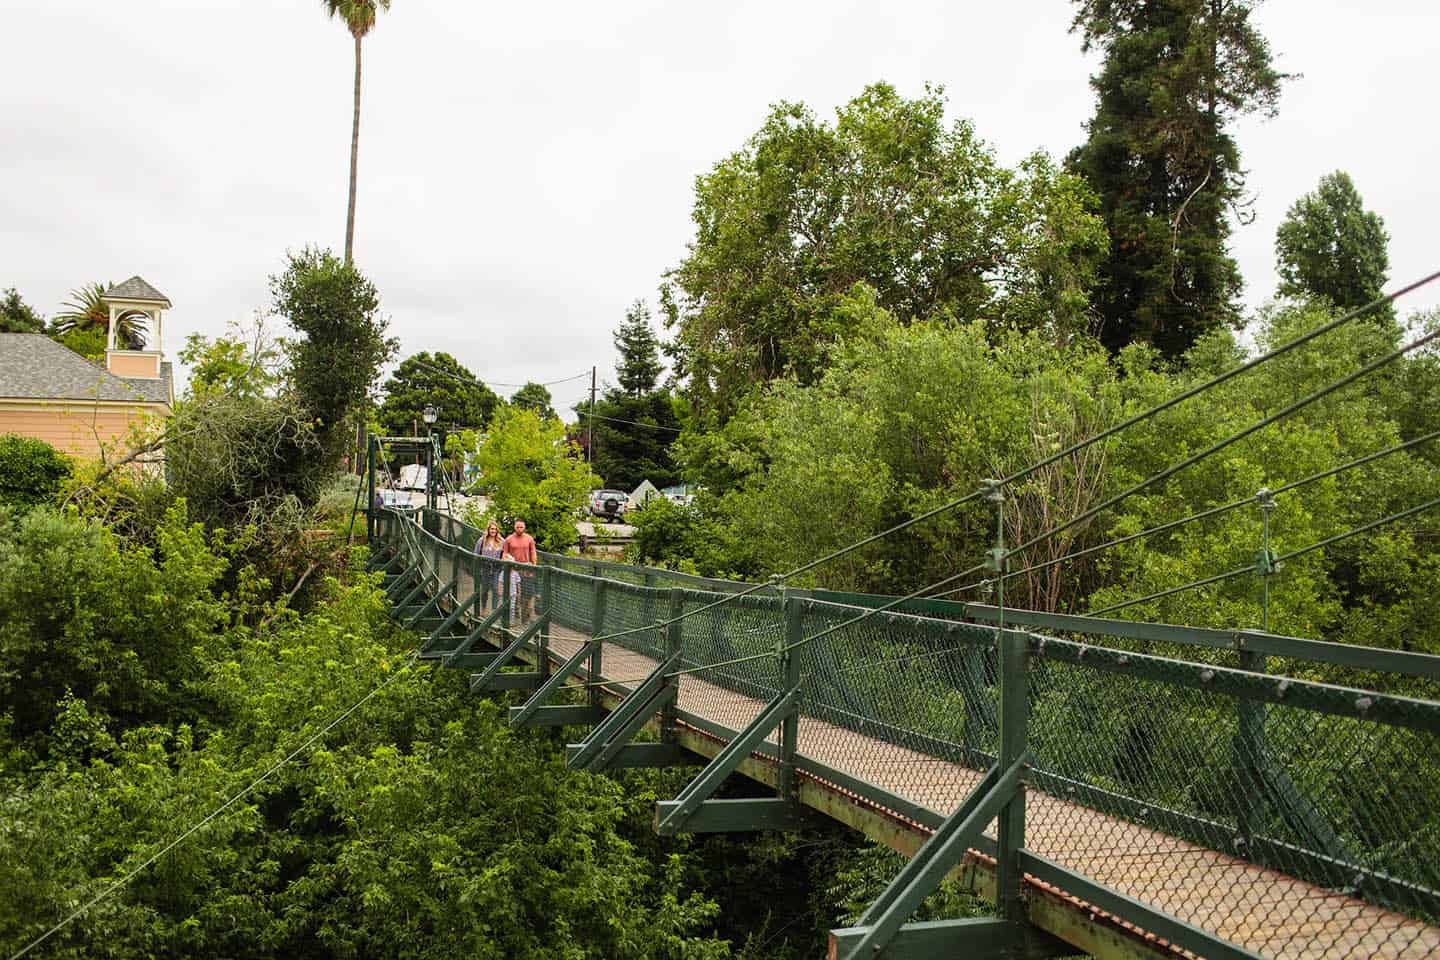 The Swinging Footbridge with the historic school house in the distance